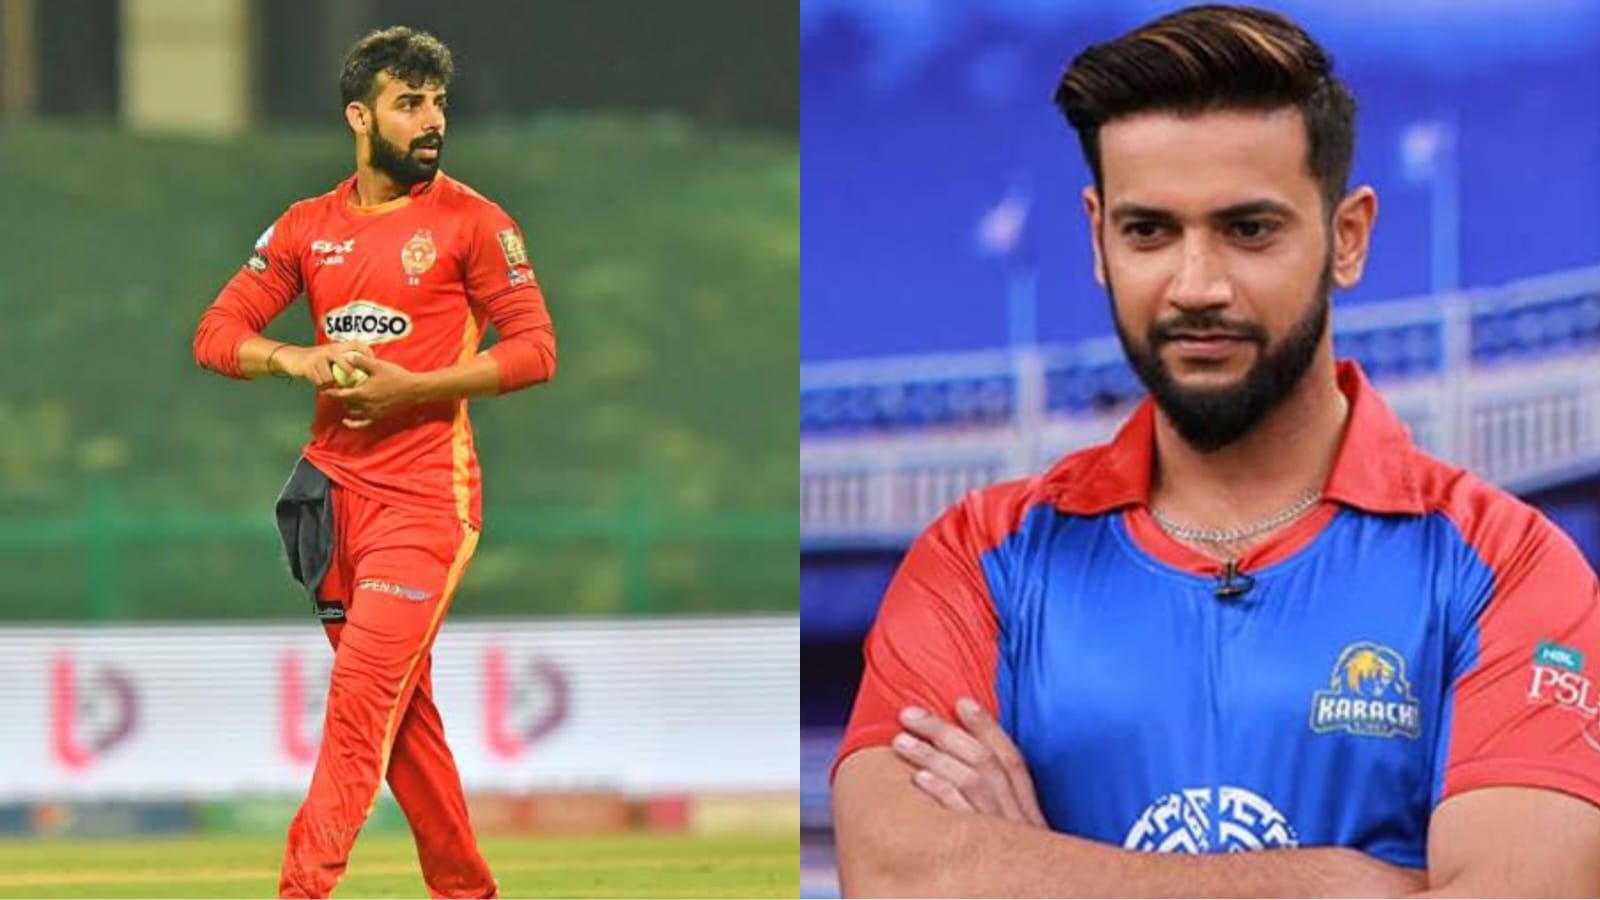 PSL8: Karachi Kings vs Islamabad United live to be played today at 7 pm